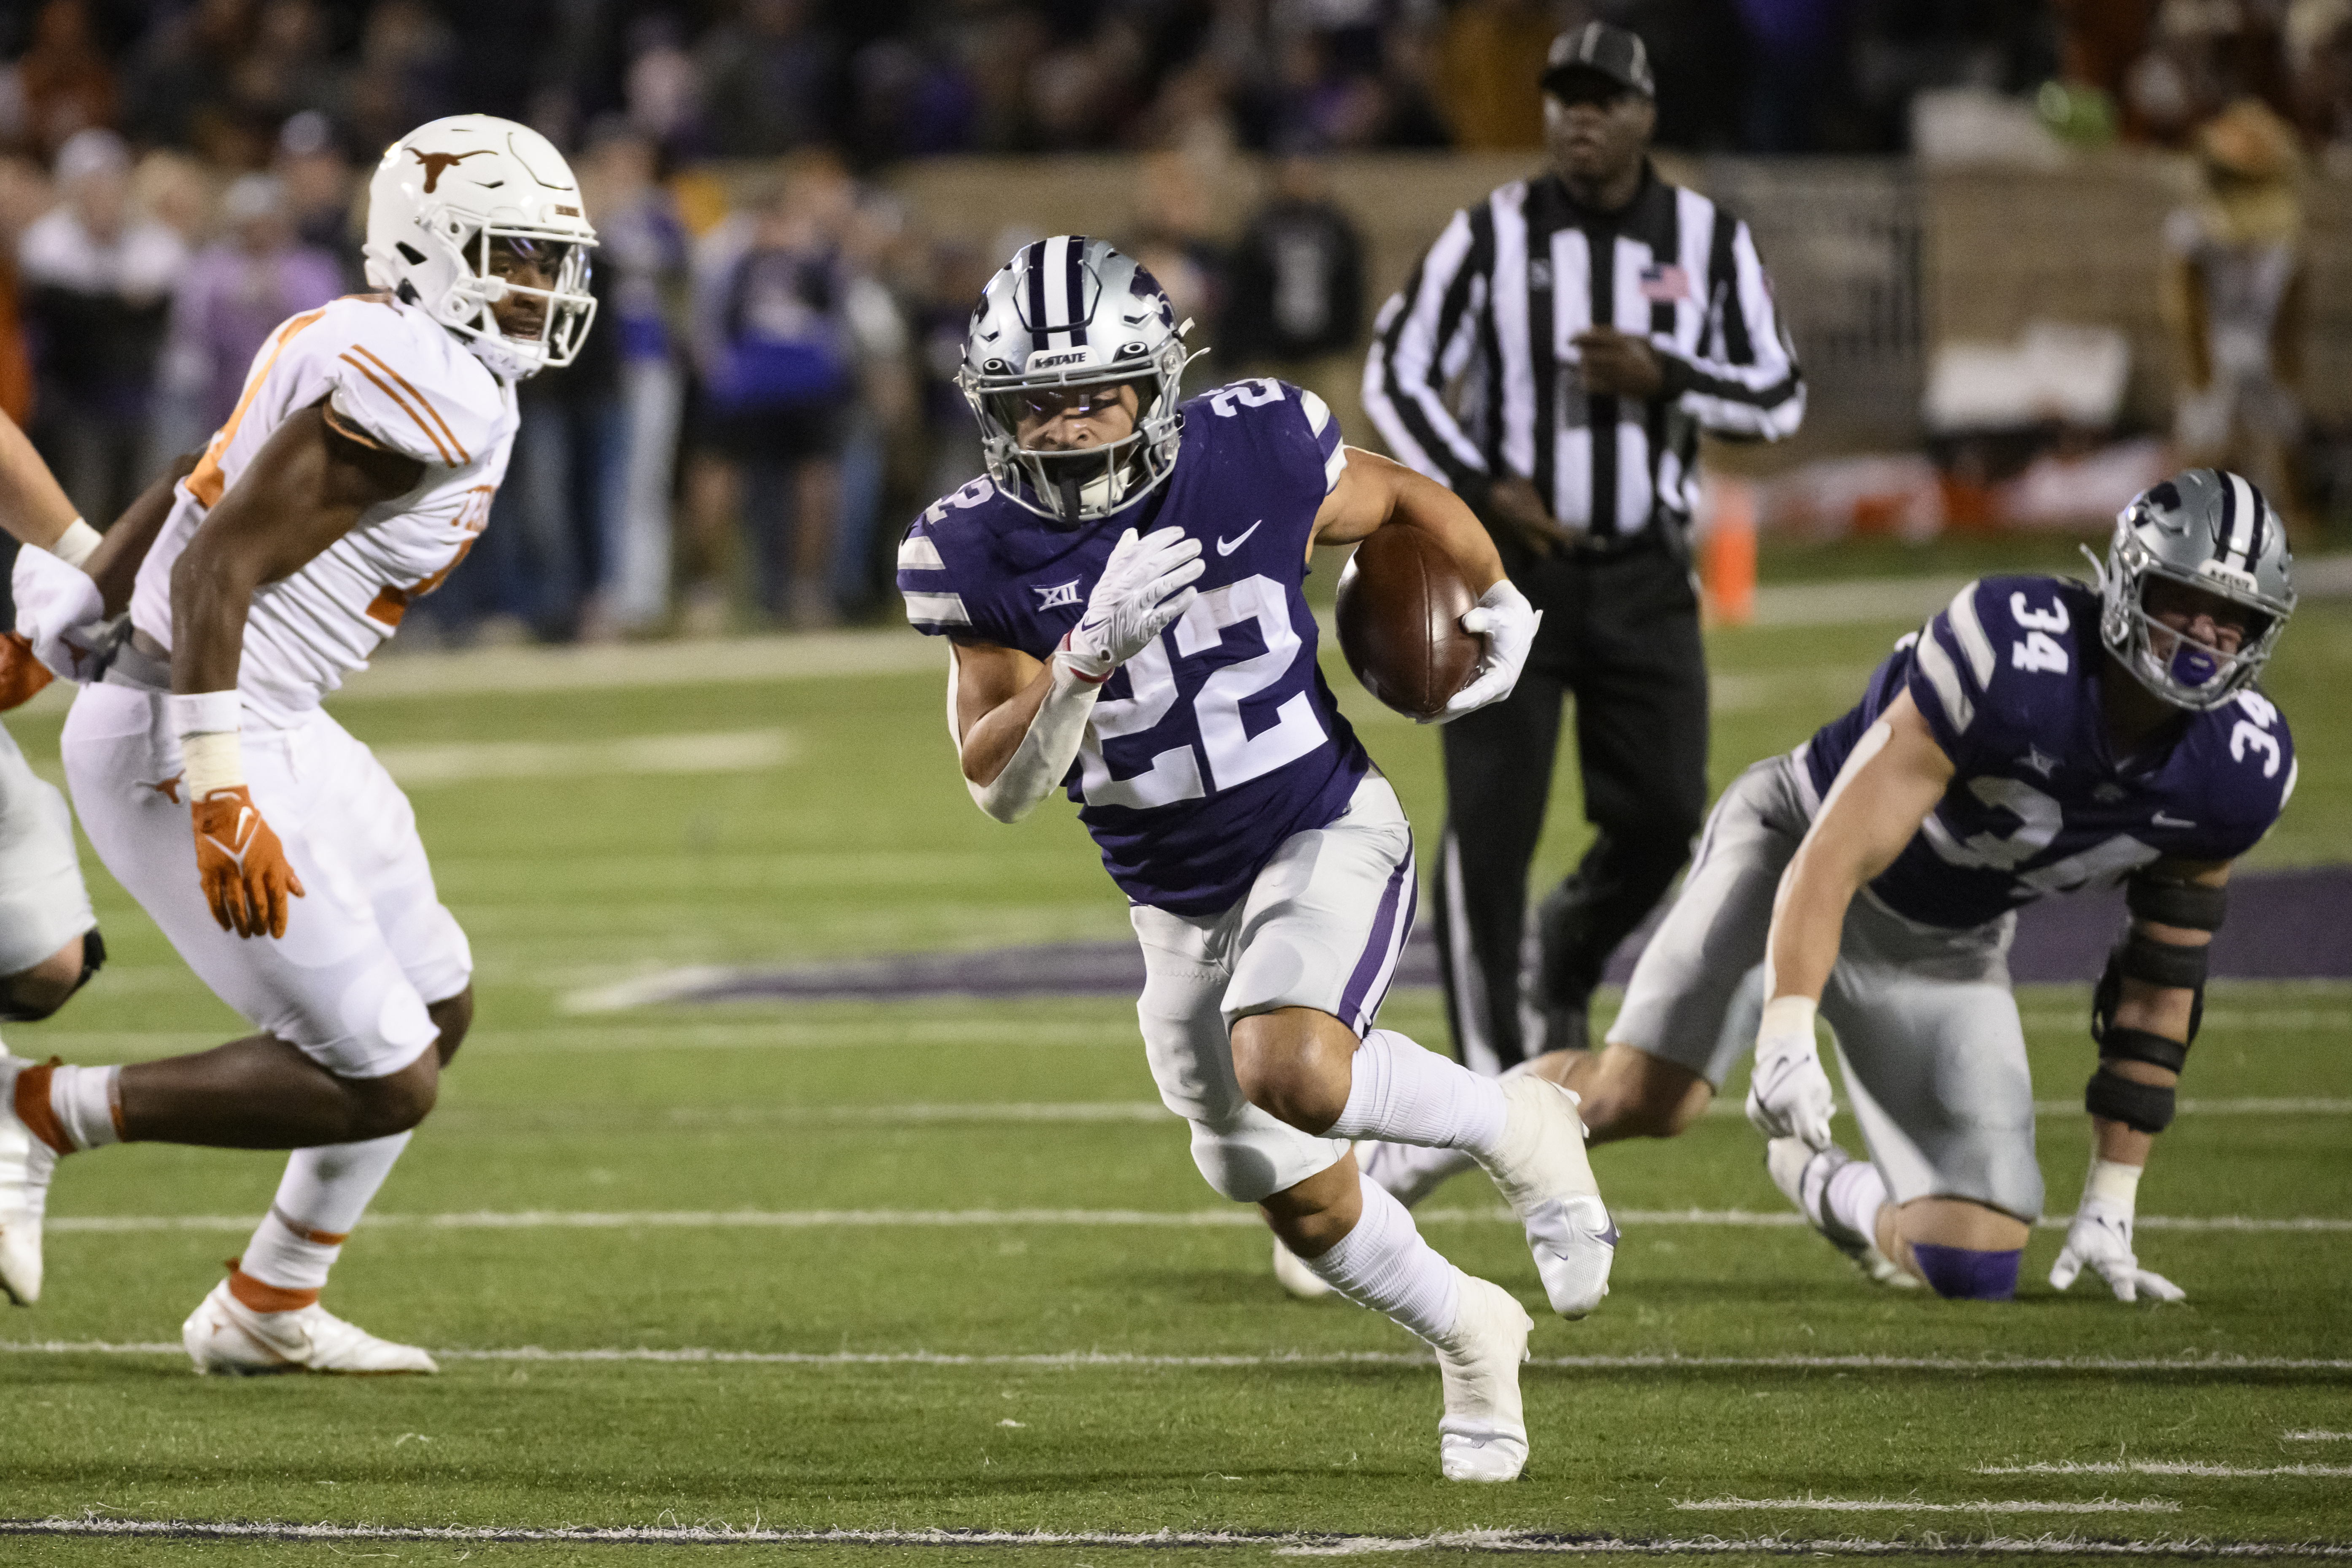 Kansas State must feature Deuce Vaughn. Question is, how and how often